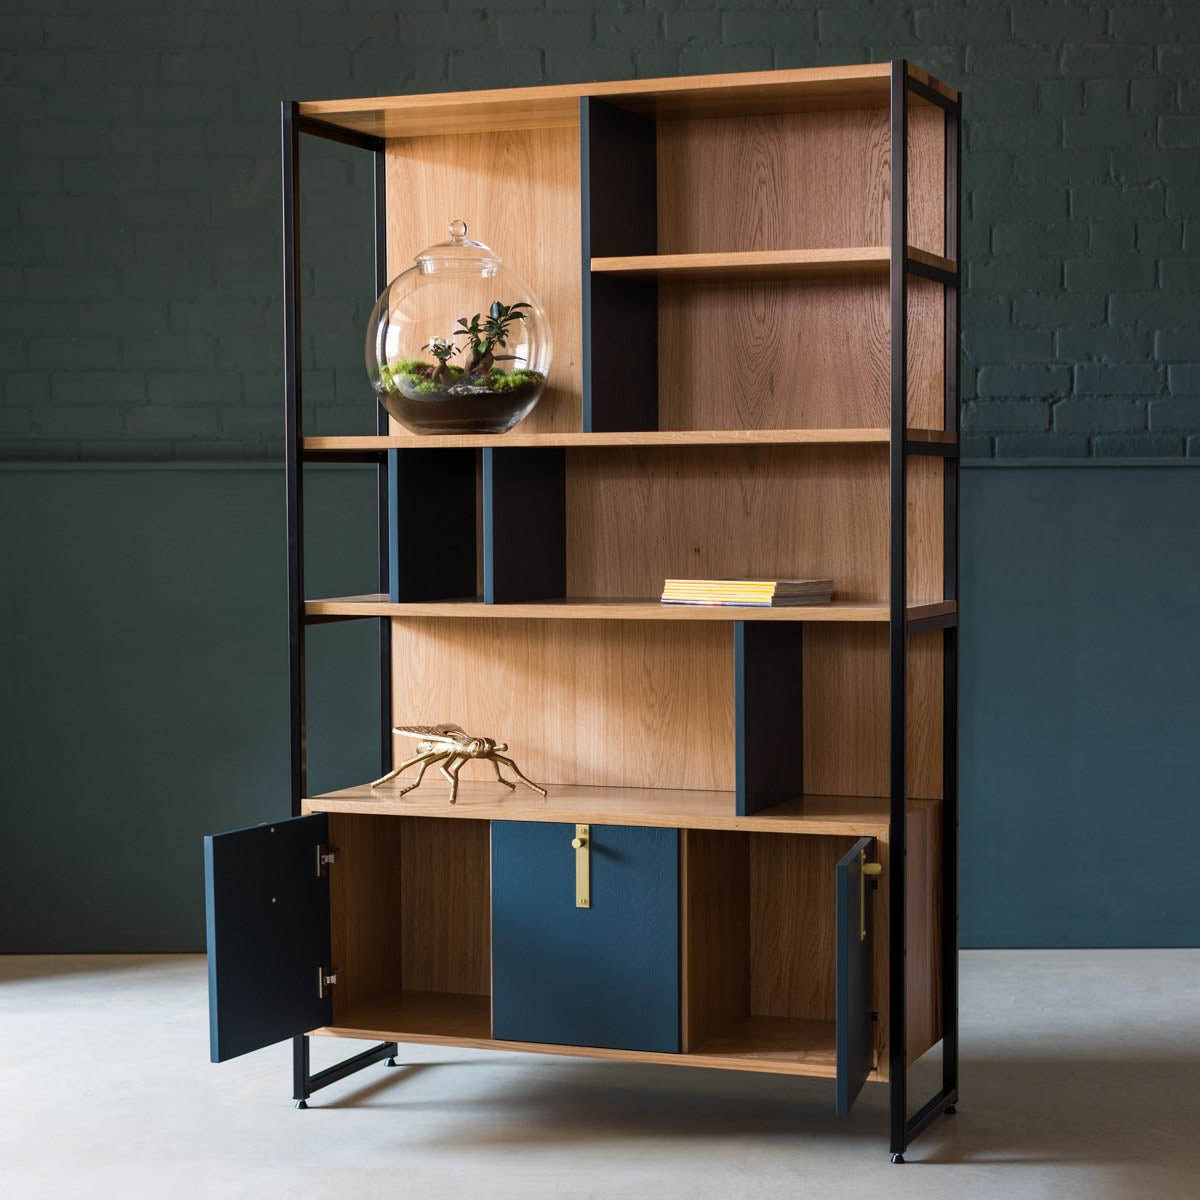 An image of the Oak Shelving Unit, Hague product available from Koda Studios